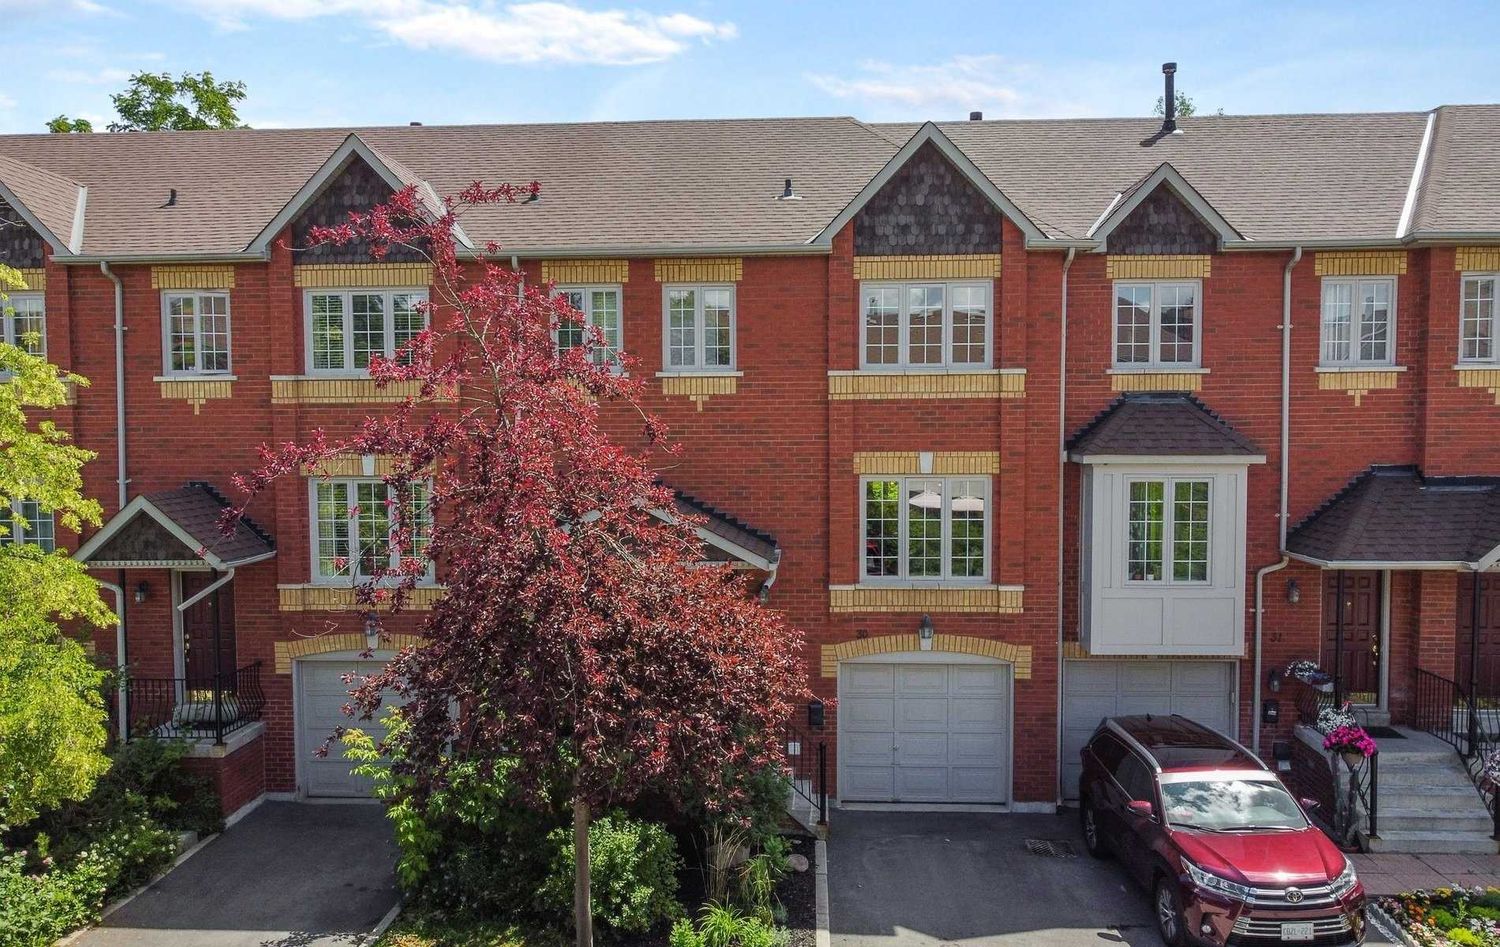 95 Weldrick Road E. Observatory Gate Townhomes is located in  Richmond Hill, Toronto - image #1 of 3